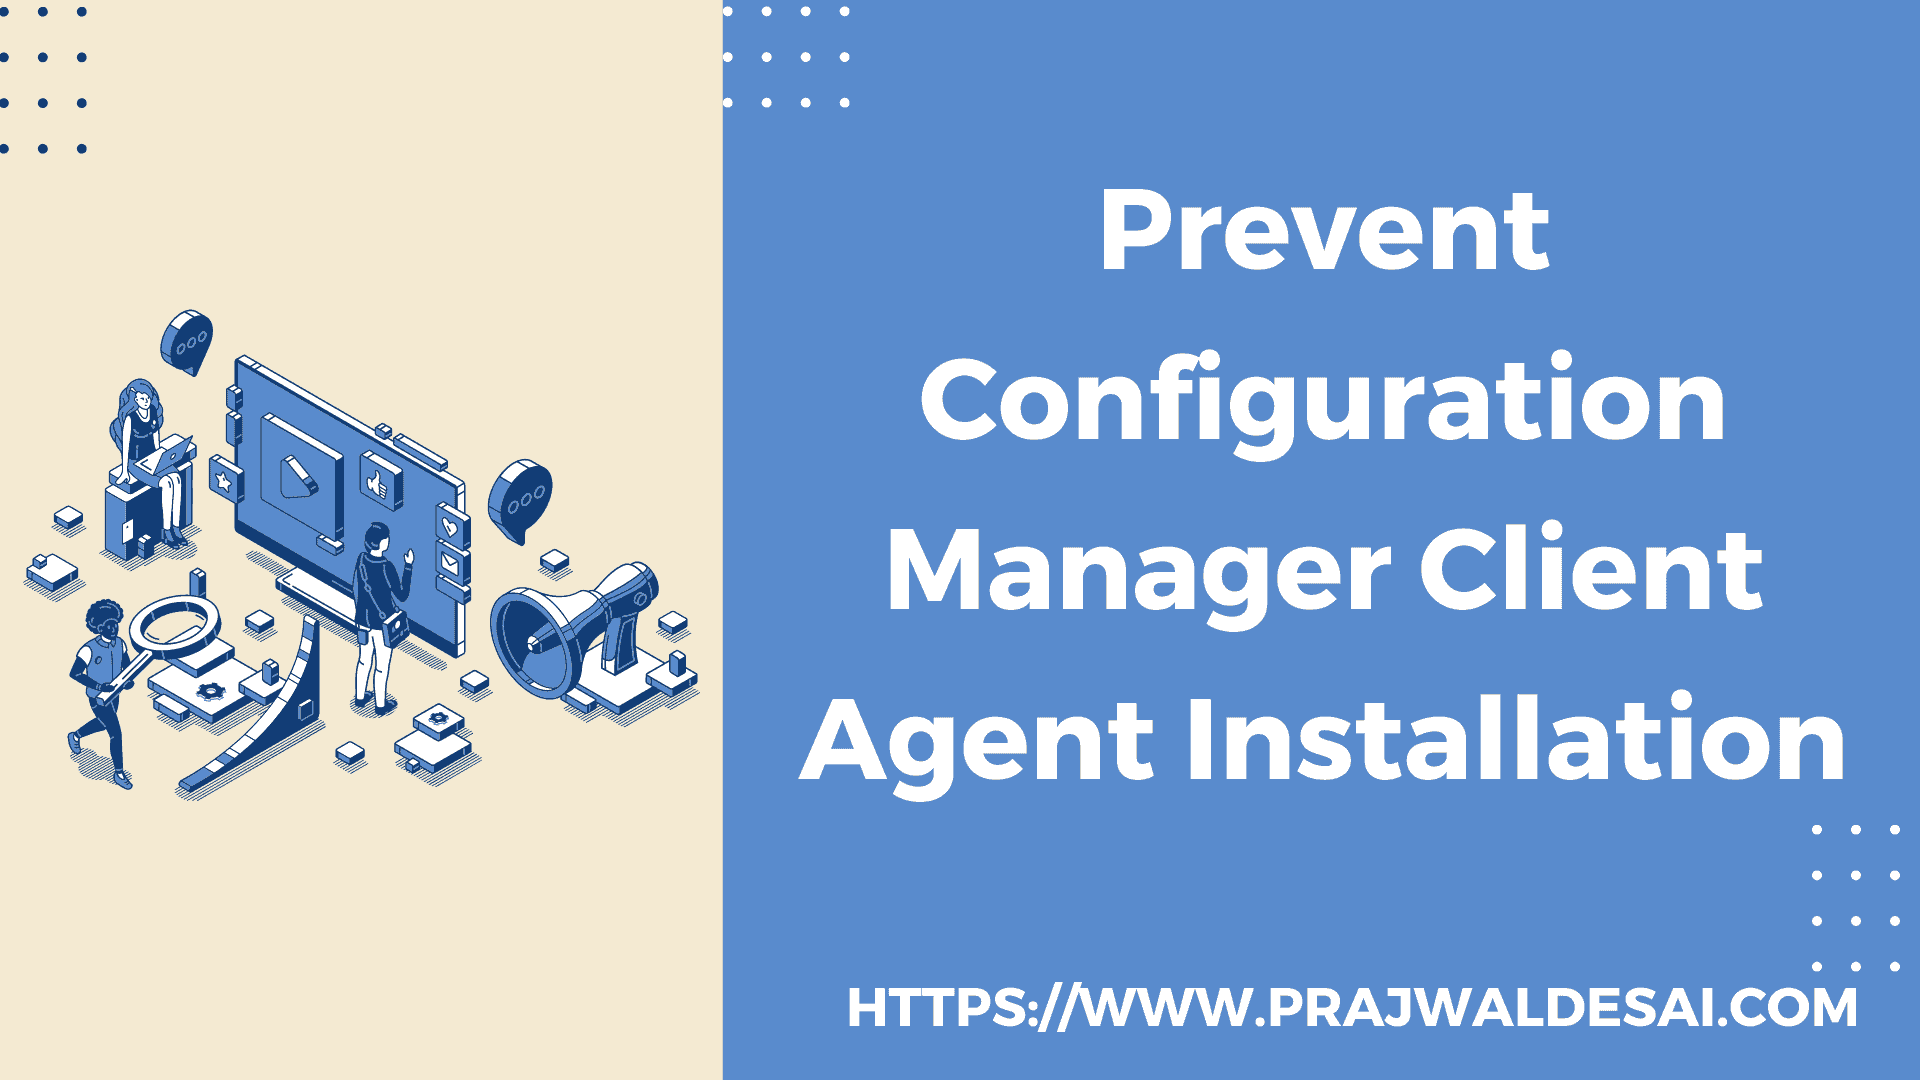 Prevent Configuration Manager Client Agent Installation